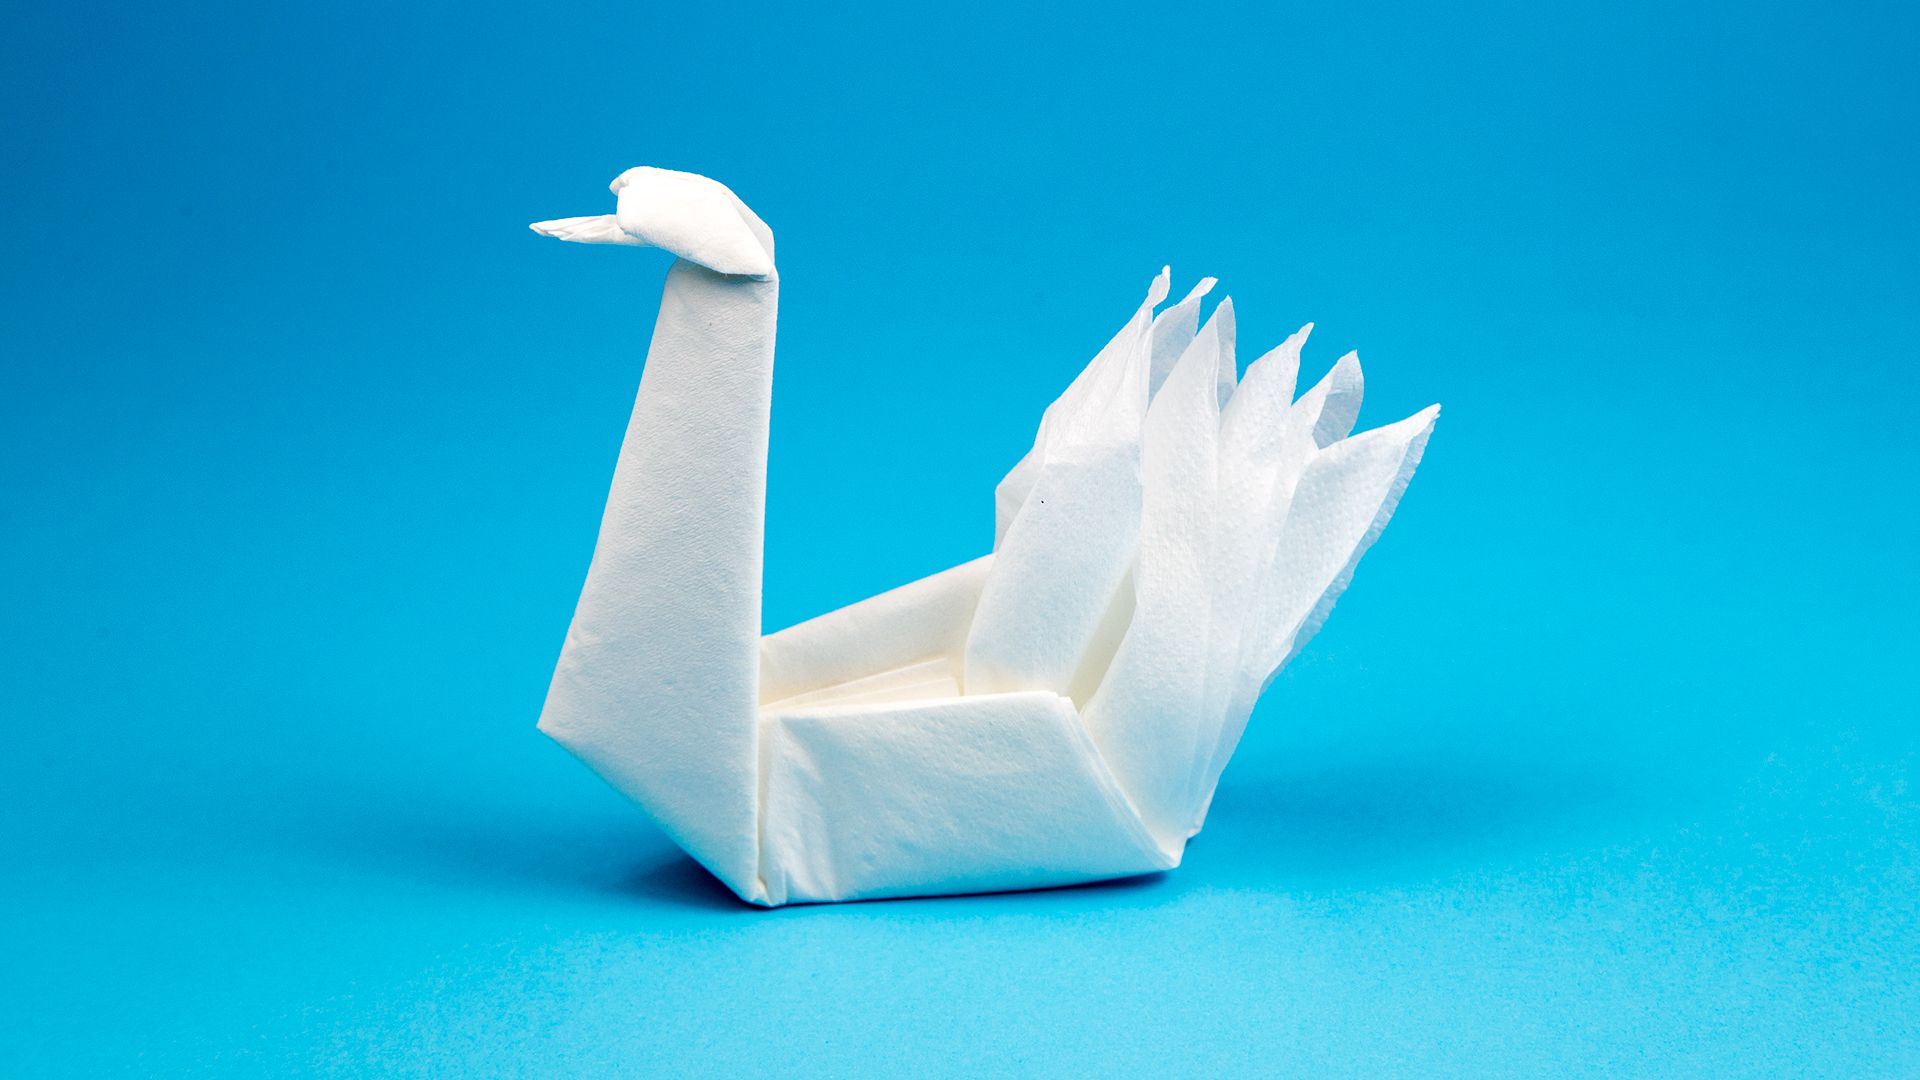 How to Make an Origami Napkin Swan